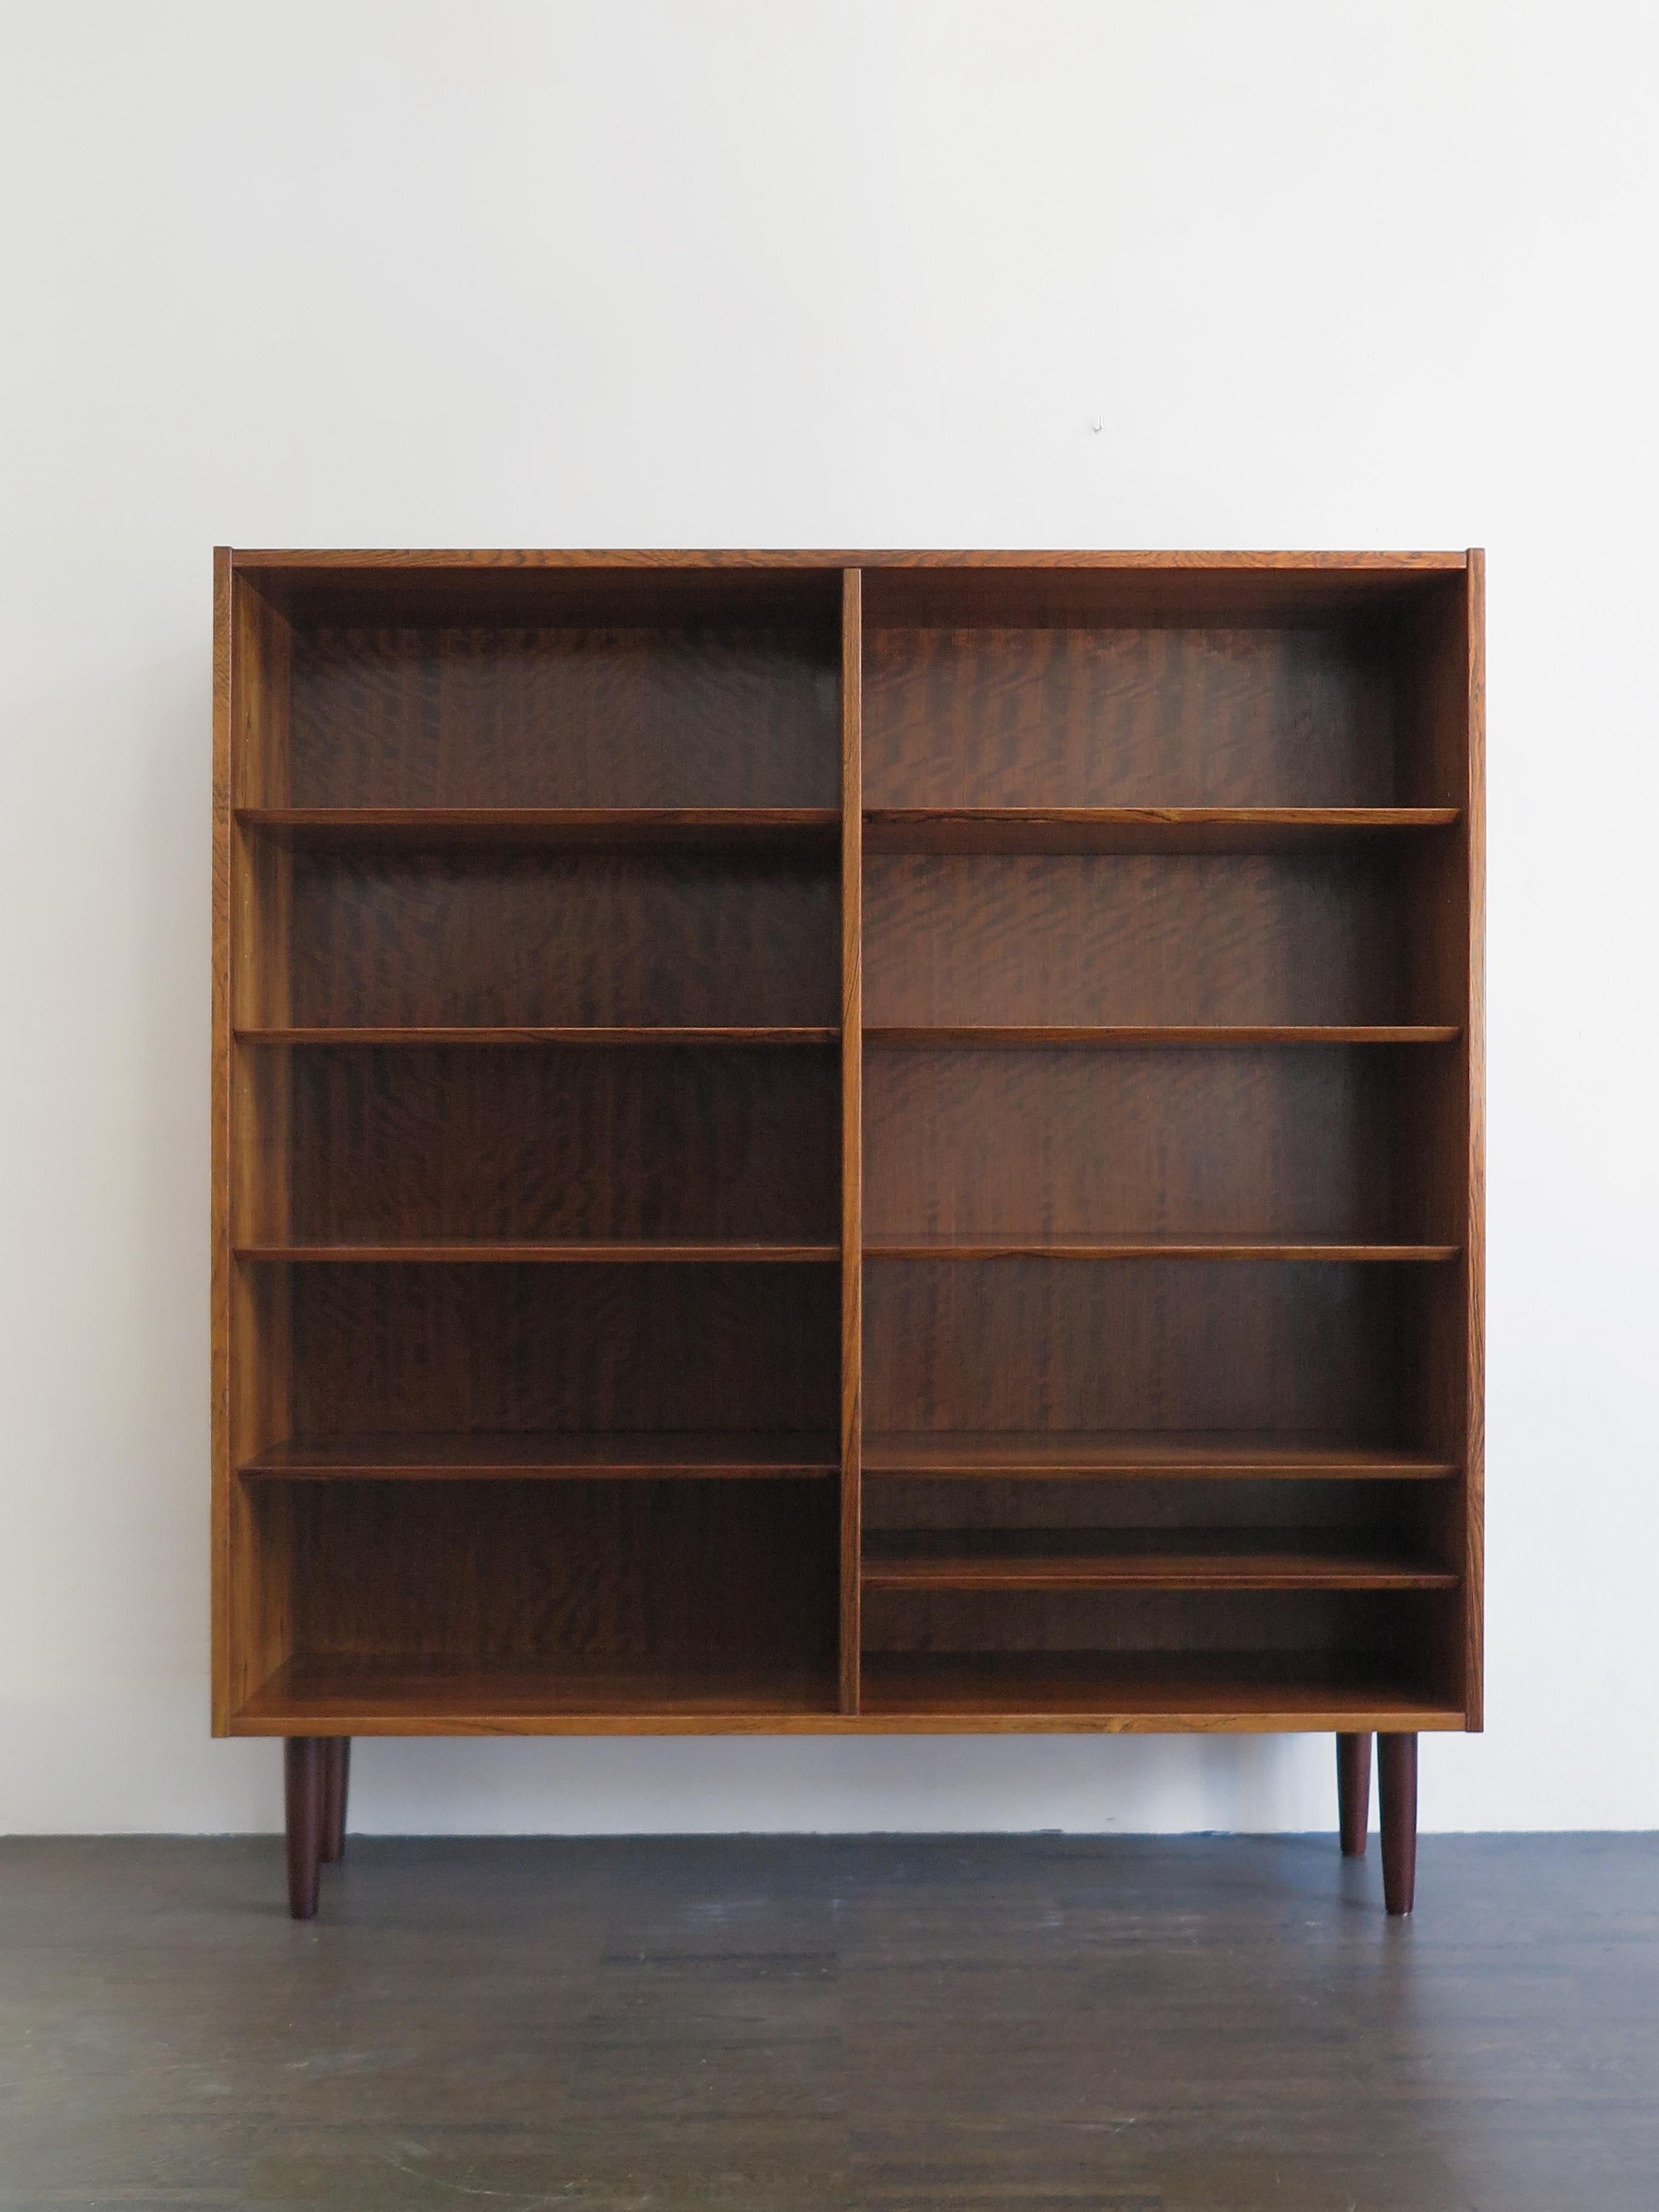 Scandinavian Mid-Century Modern design darkwood bookcase designed by Poul Hundevad and produced by Hundevad Møbelfabrik in the 1960s, variable height position of shelves, Denmark 1960s

Please note that the item is original of the period and this